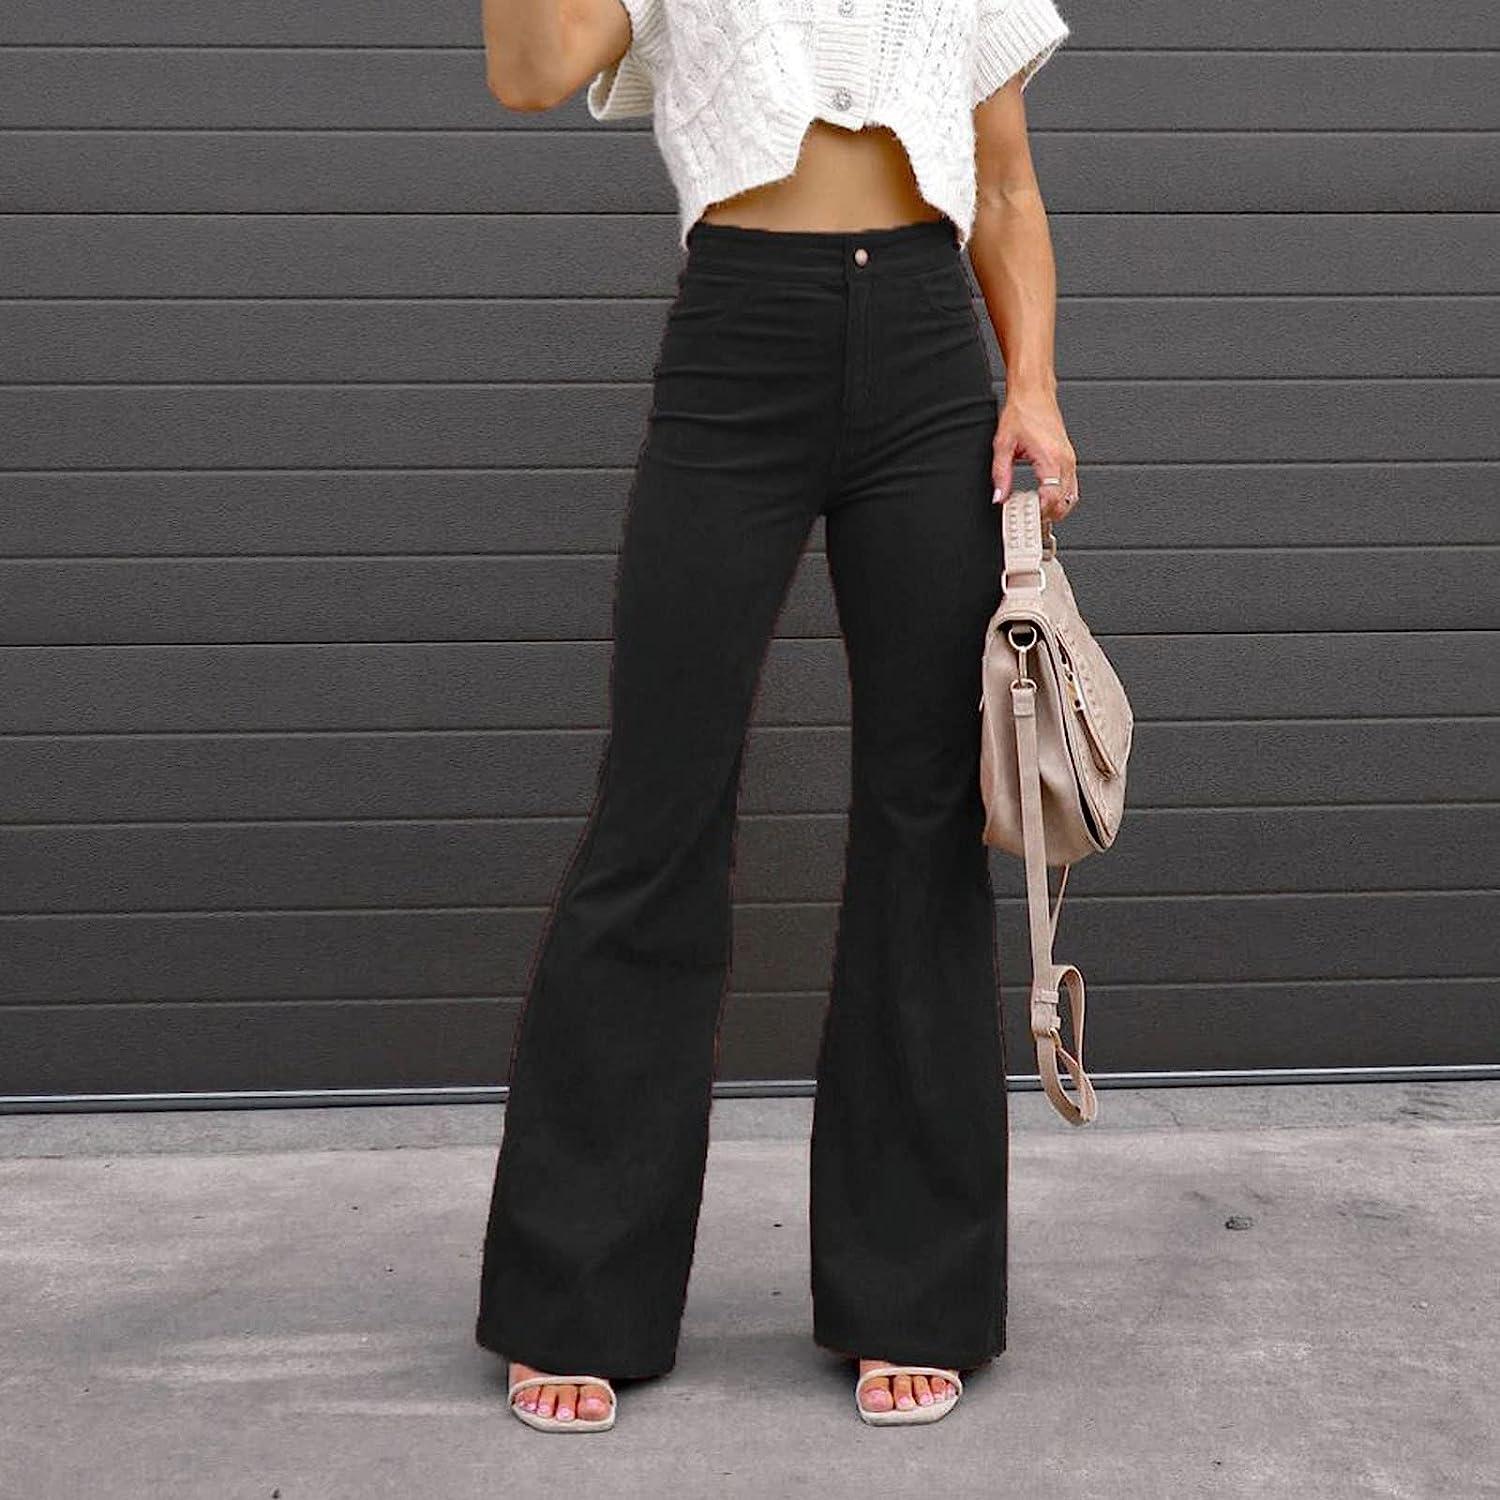 High Waisted Corduroy Pants for Women Vintage Flare Pants Bell